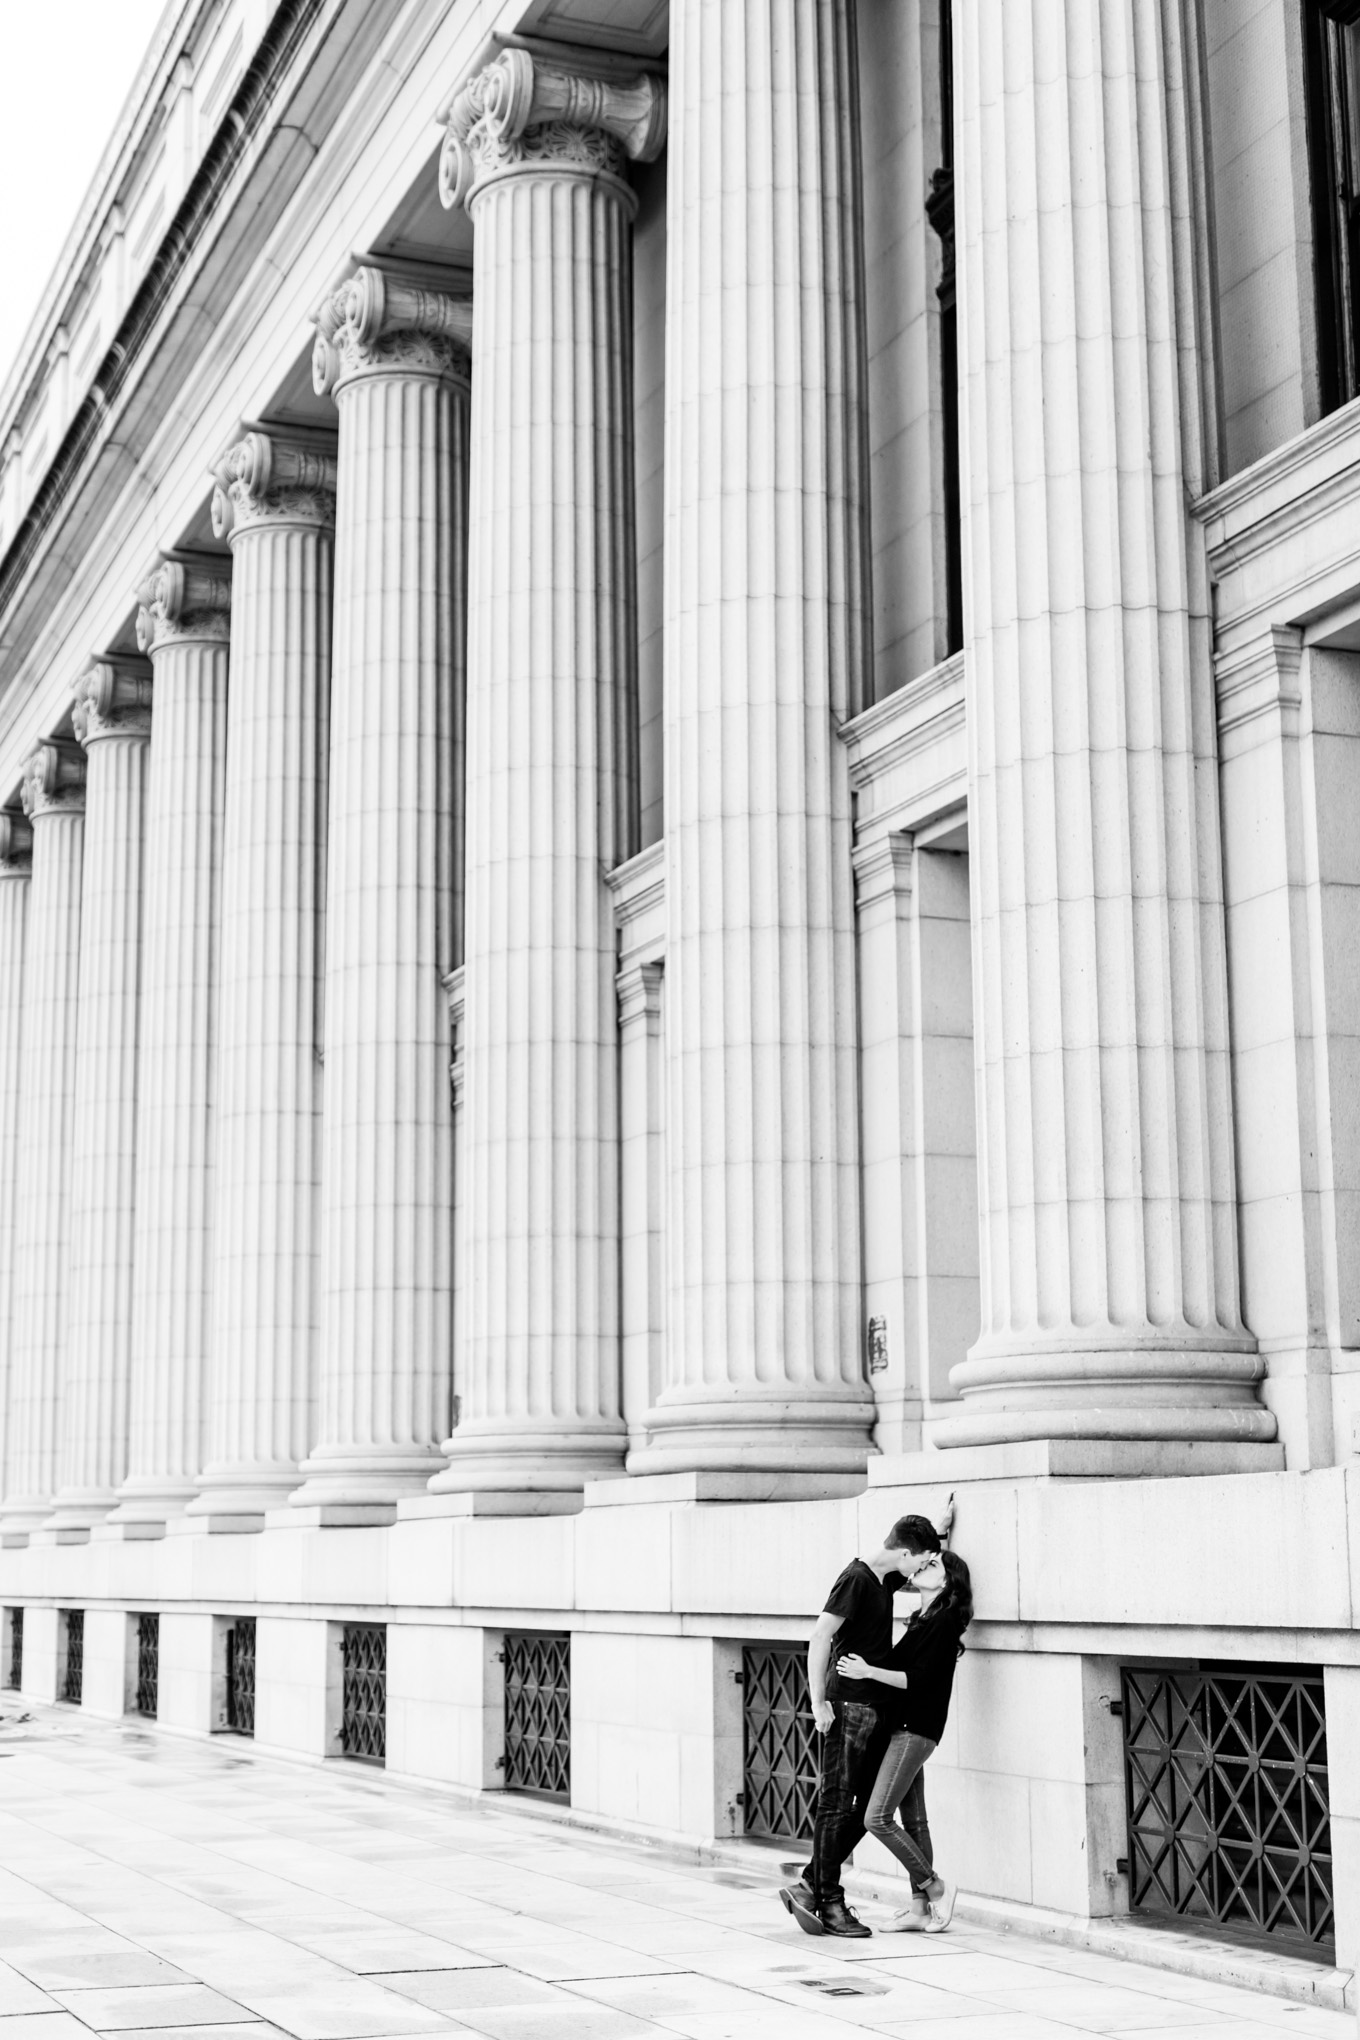 black and white engagement photos, black and white photography, black and white photos, engagement photos, black and white D.C., D.C. engagement photos, classic engagement photos, traditional engagement photos, engagement photos poses, classic architecture, D.C. architecture, Union Station D.C., Union Station, engaged couple, relationship goals, joyful couple, black and white sessions, Postal Museum, couple kissing, couple leaning on wall